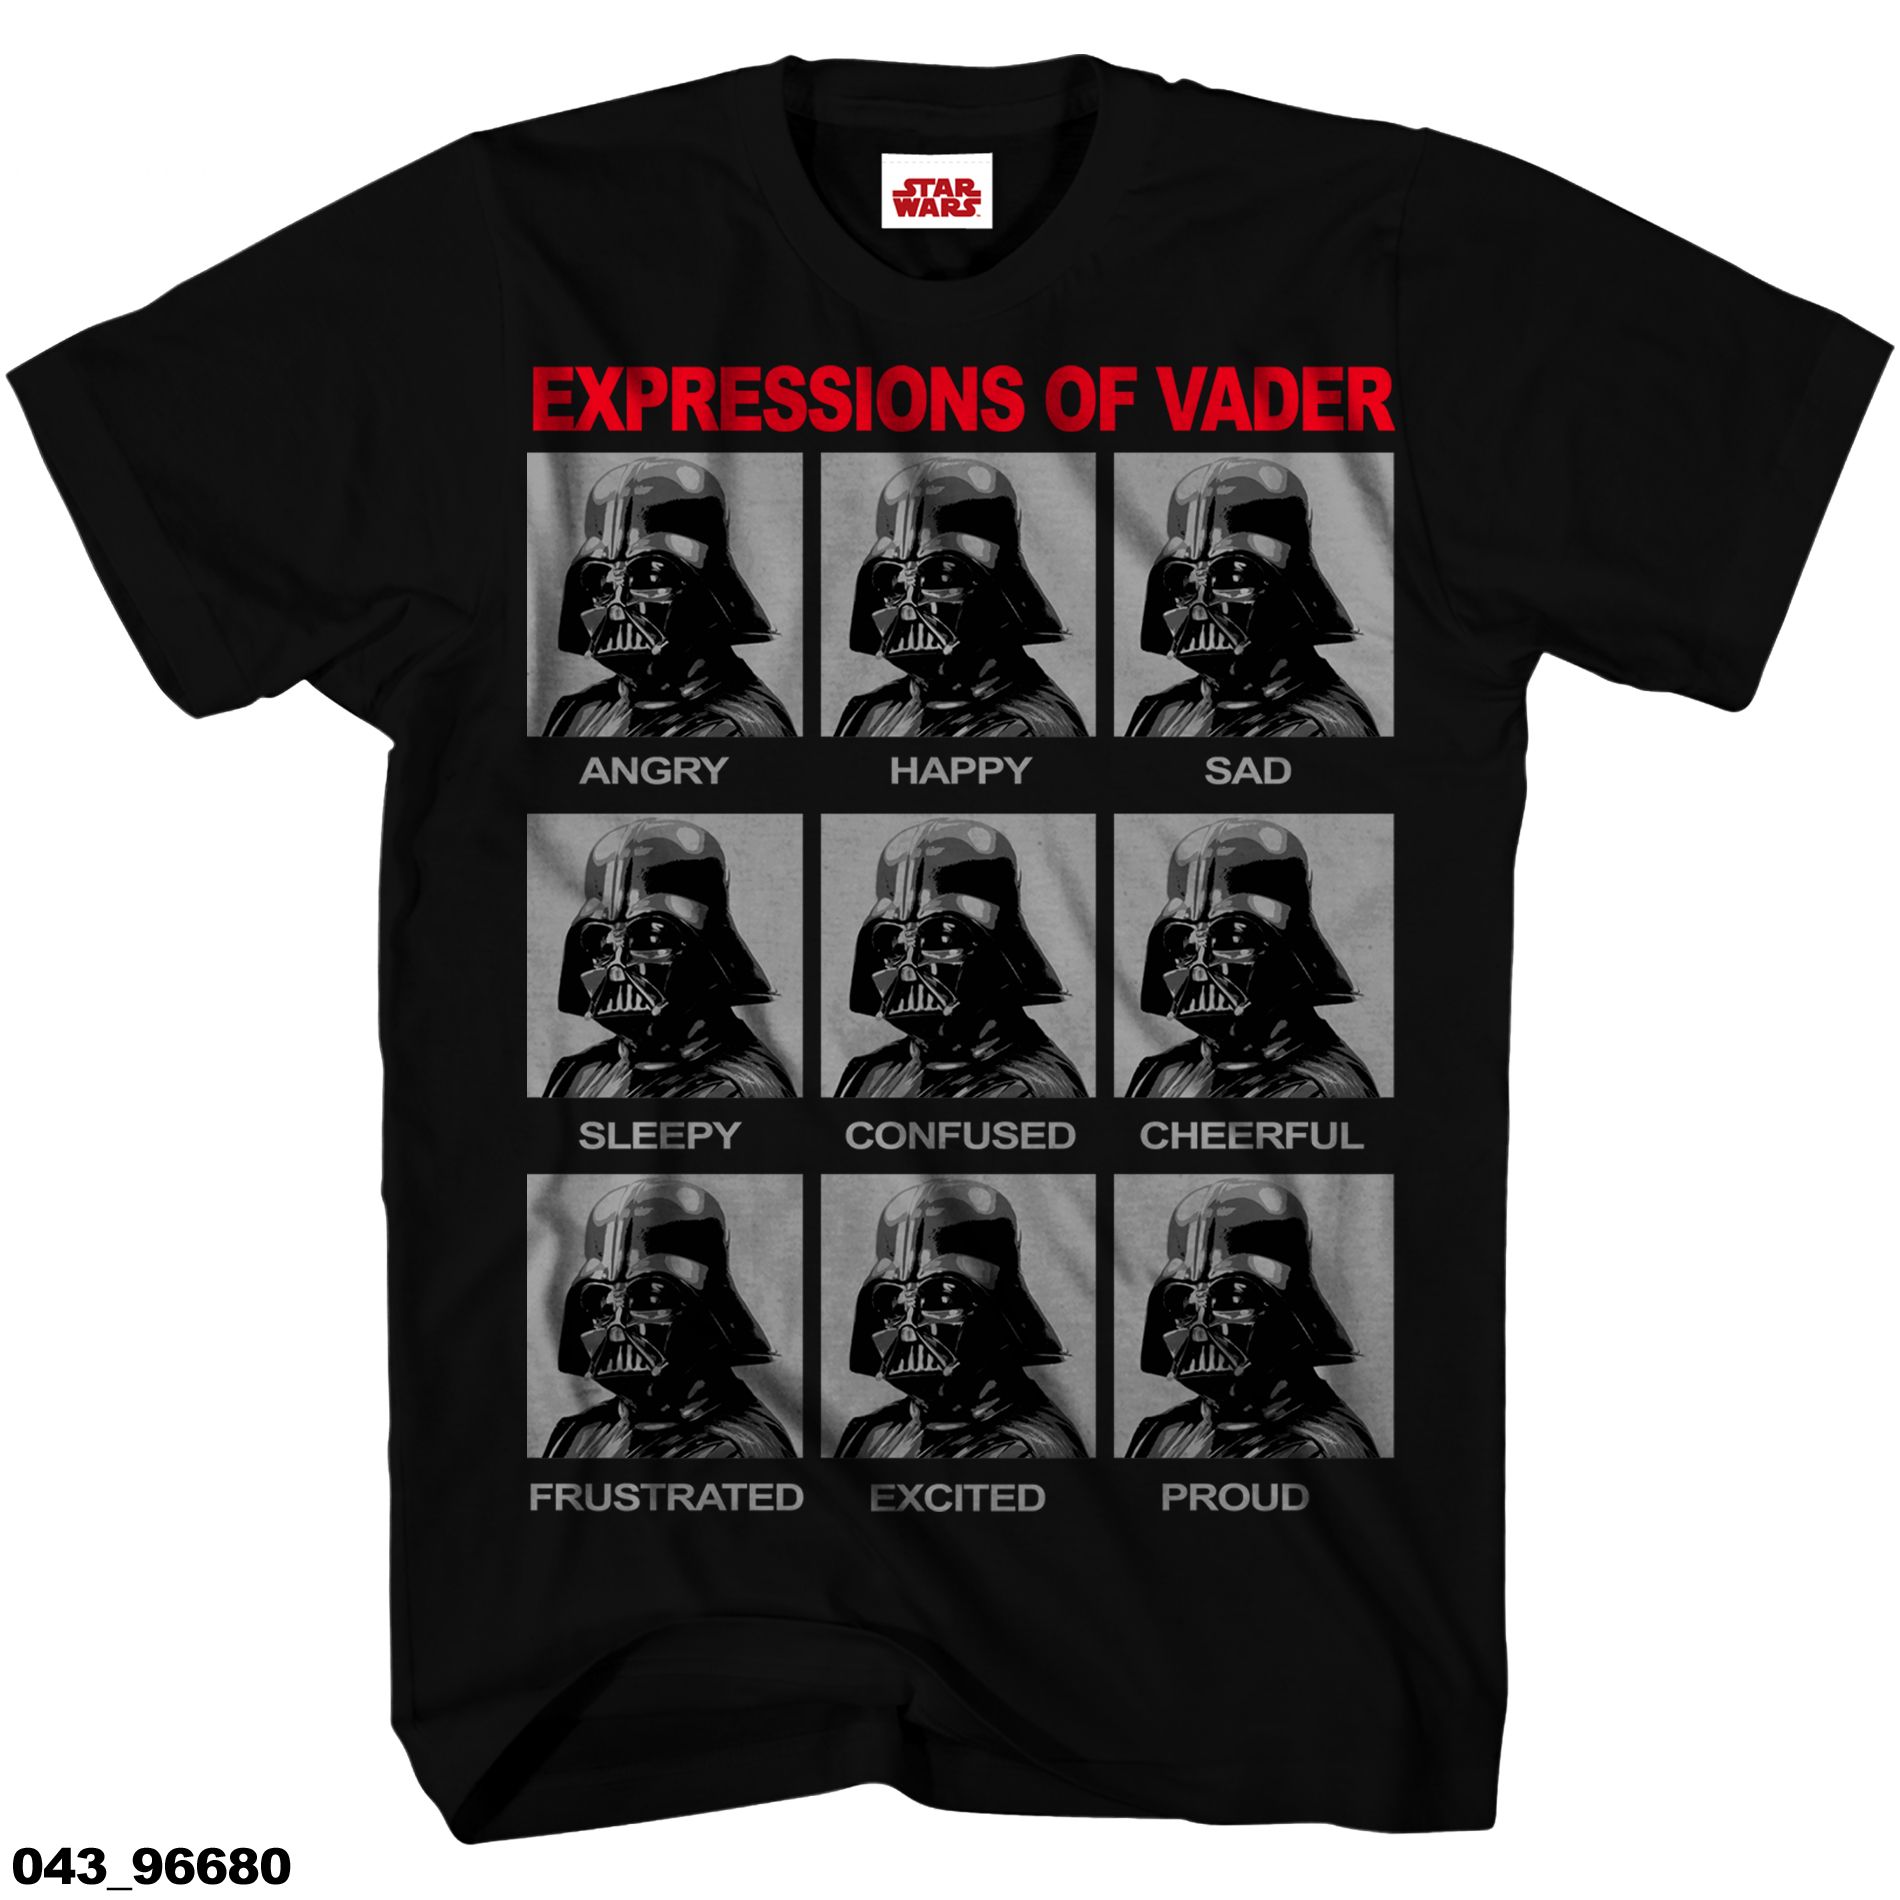 Star Wars Young Men's Graphic T-Shirt - Vader Expressions